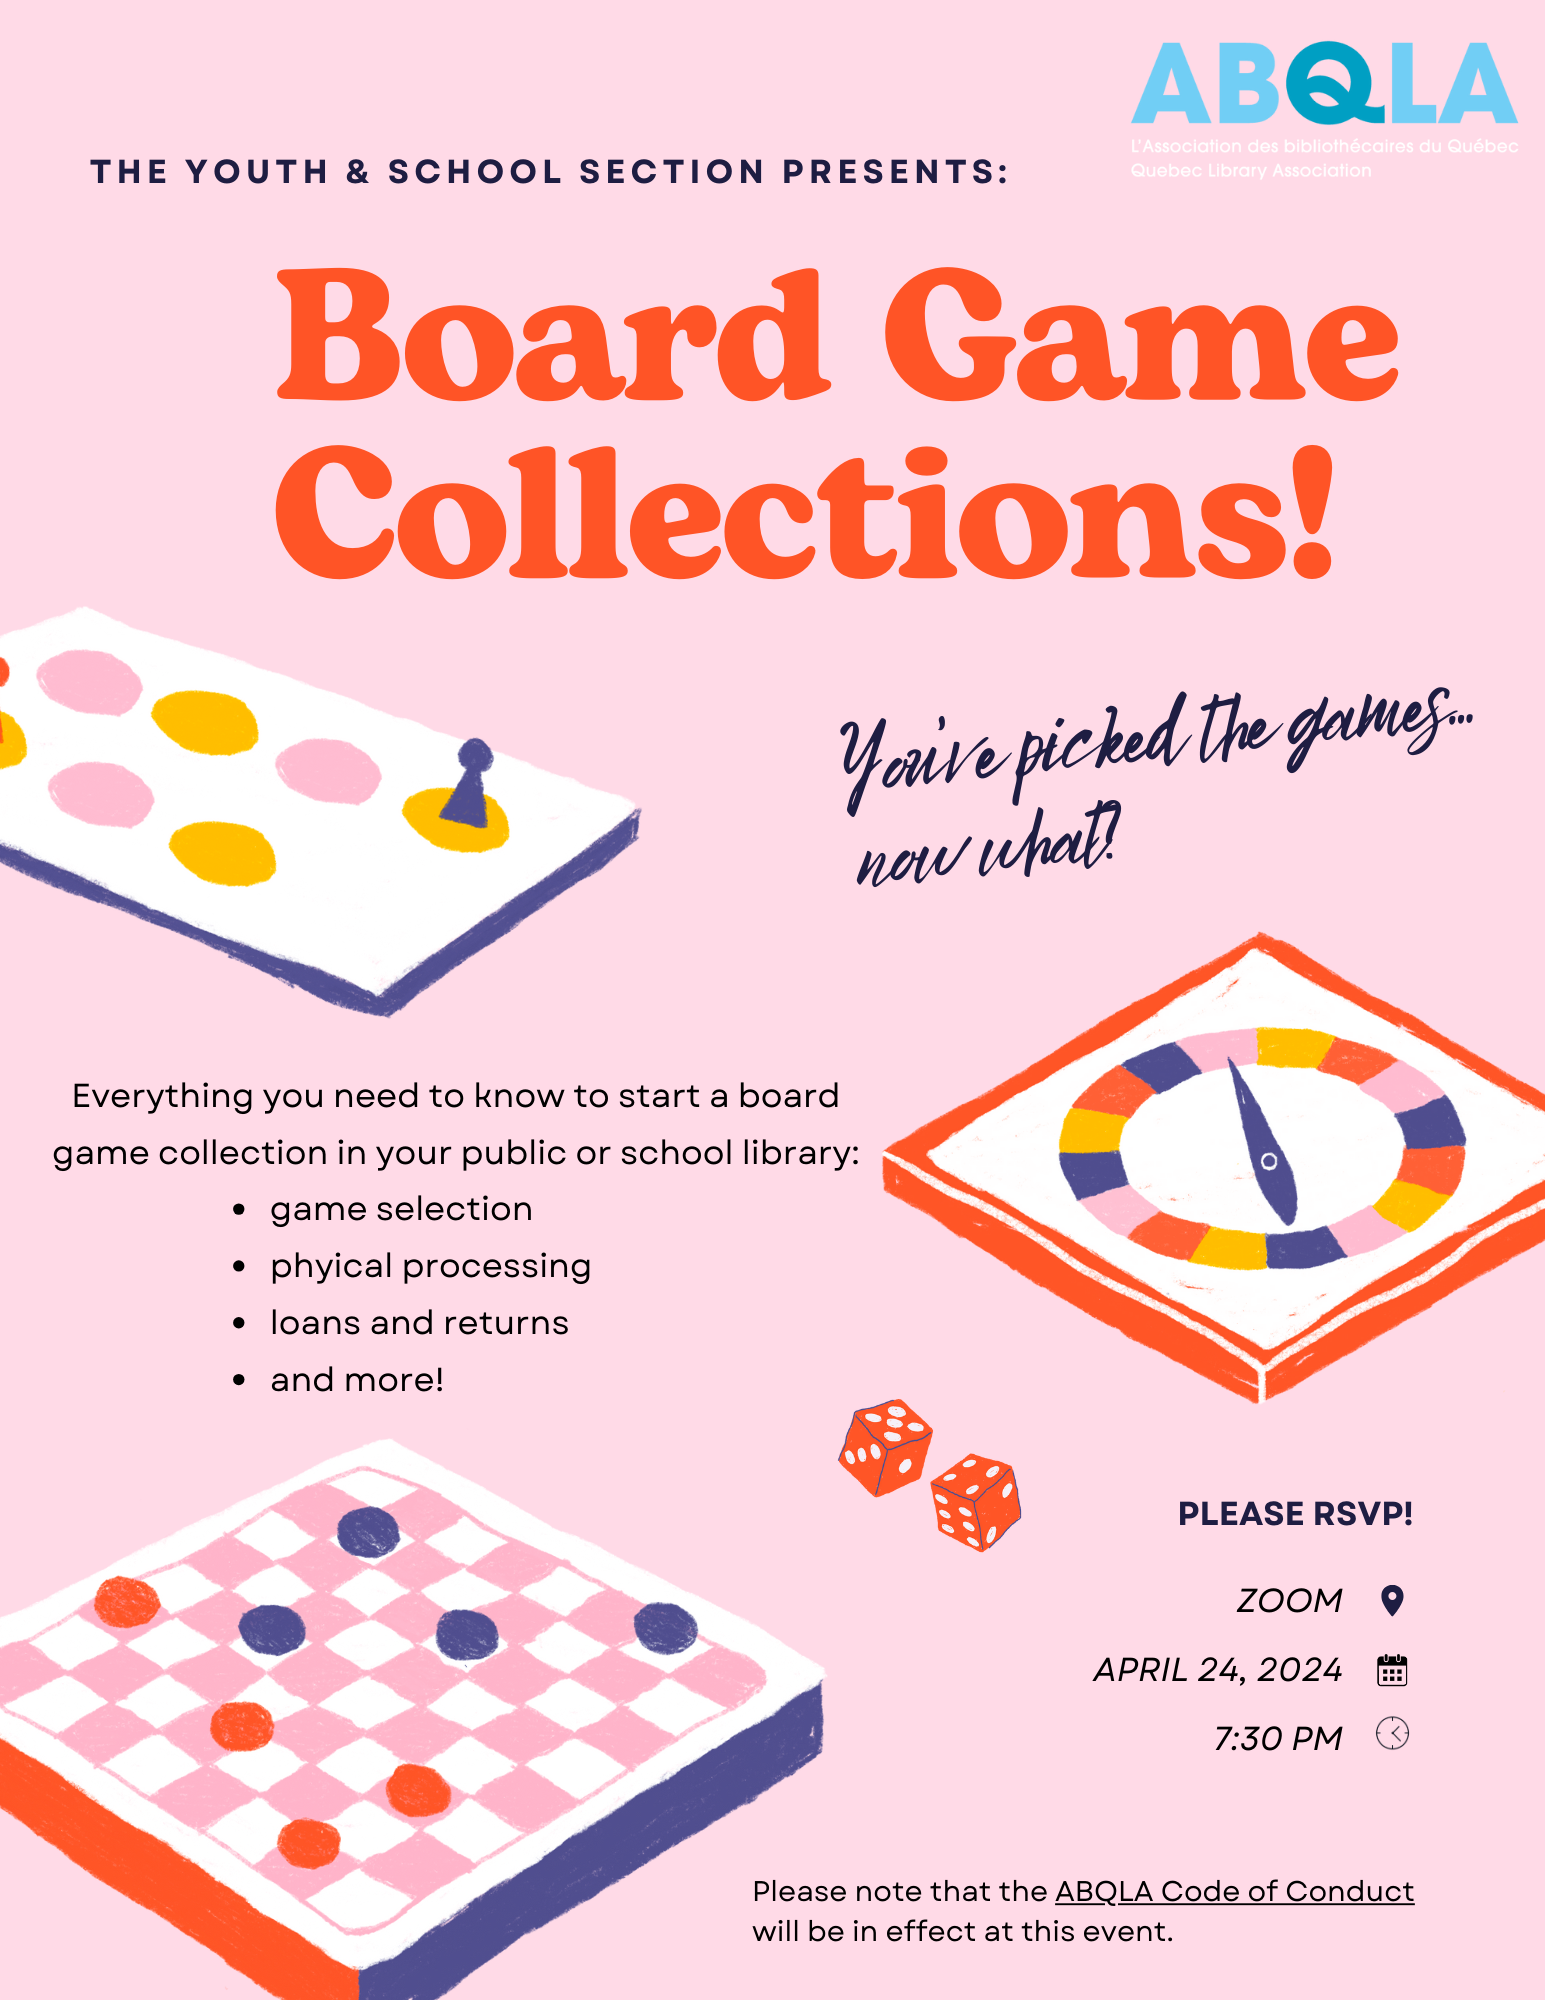 Poster for Youth & School Section Spring Event about Board Game Collections